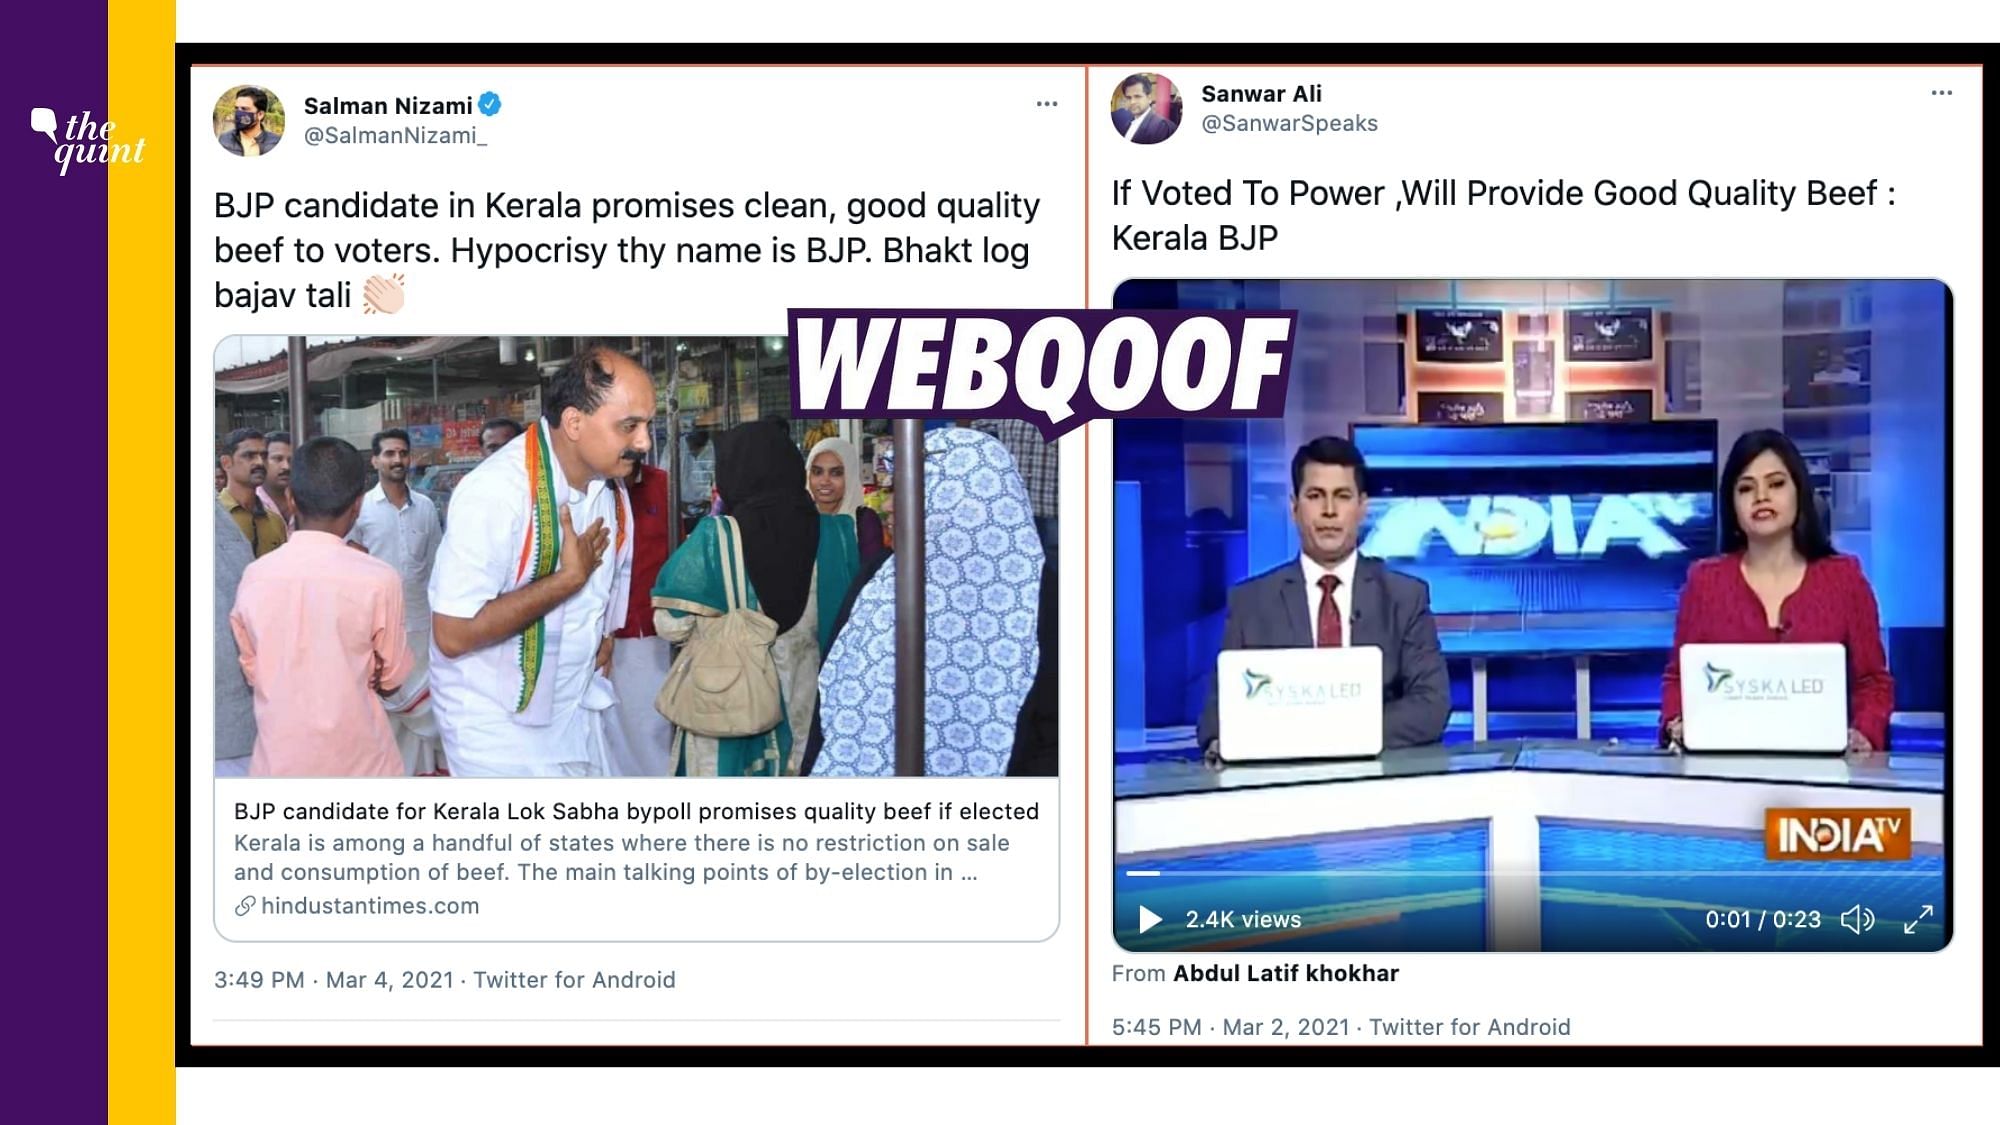 An old claim made by Kerala BJP candidate of promising “quality beef” was revived by many social media users ahead of the 2021 Kerala Assembly polls.